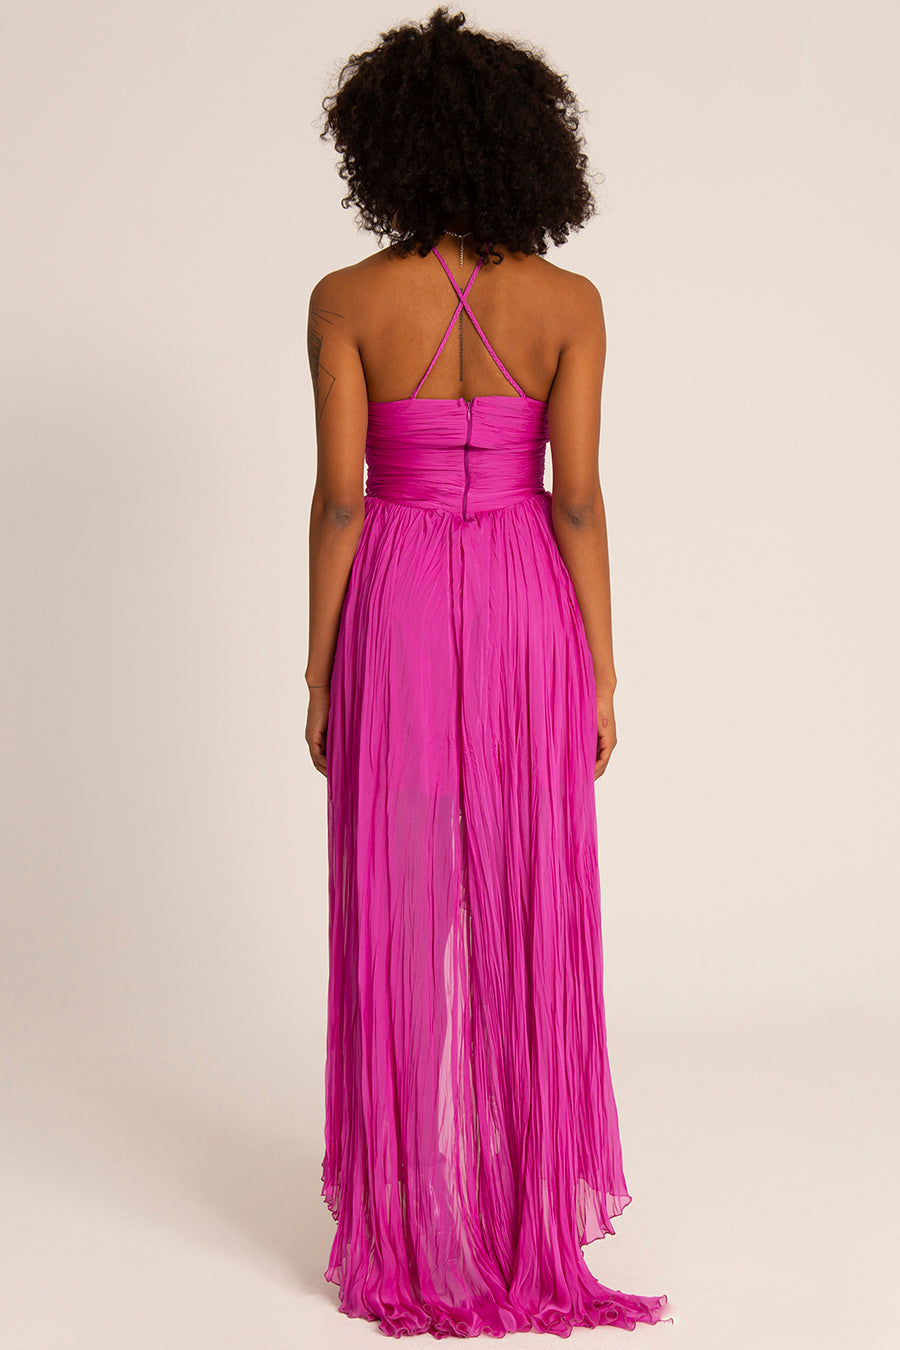 Aylin - Mystic Evenings | Evening and Prom Dresses